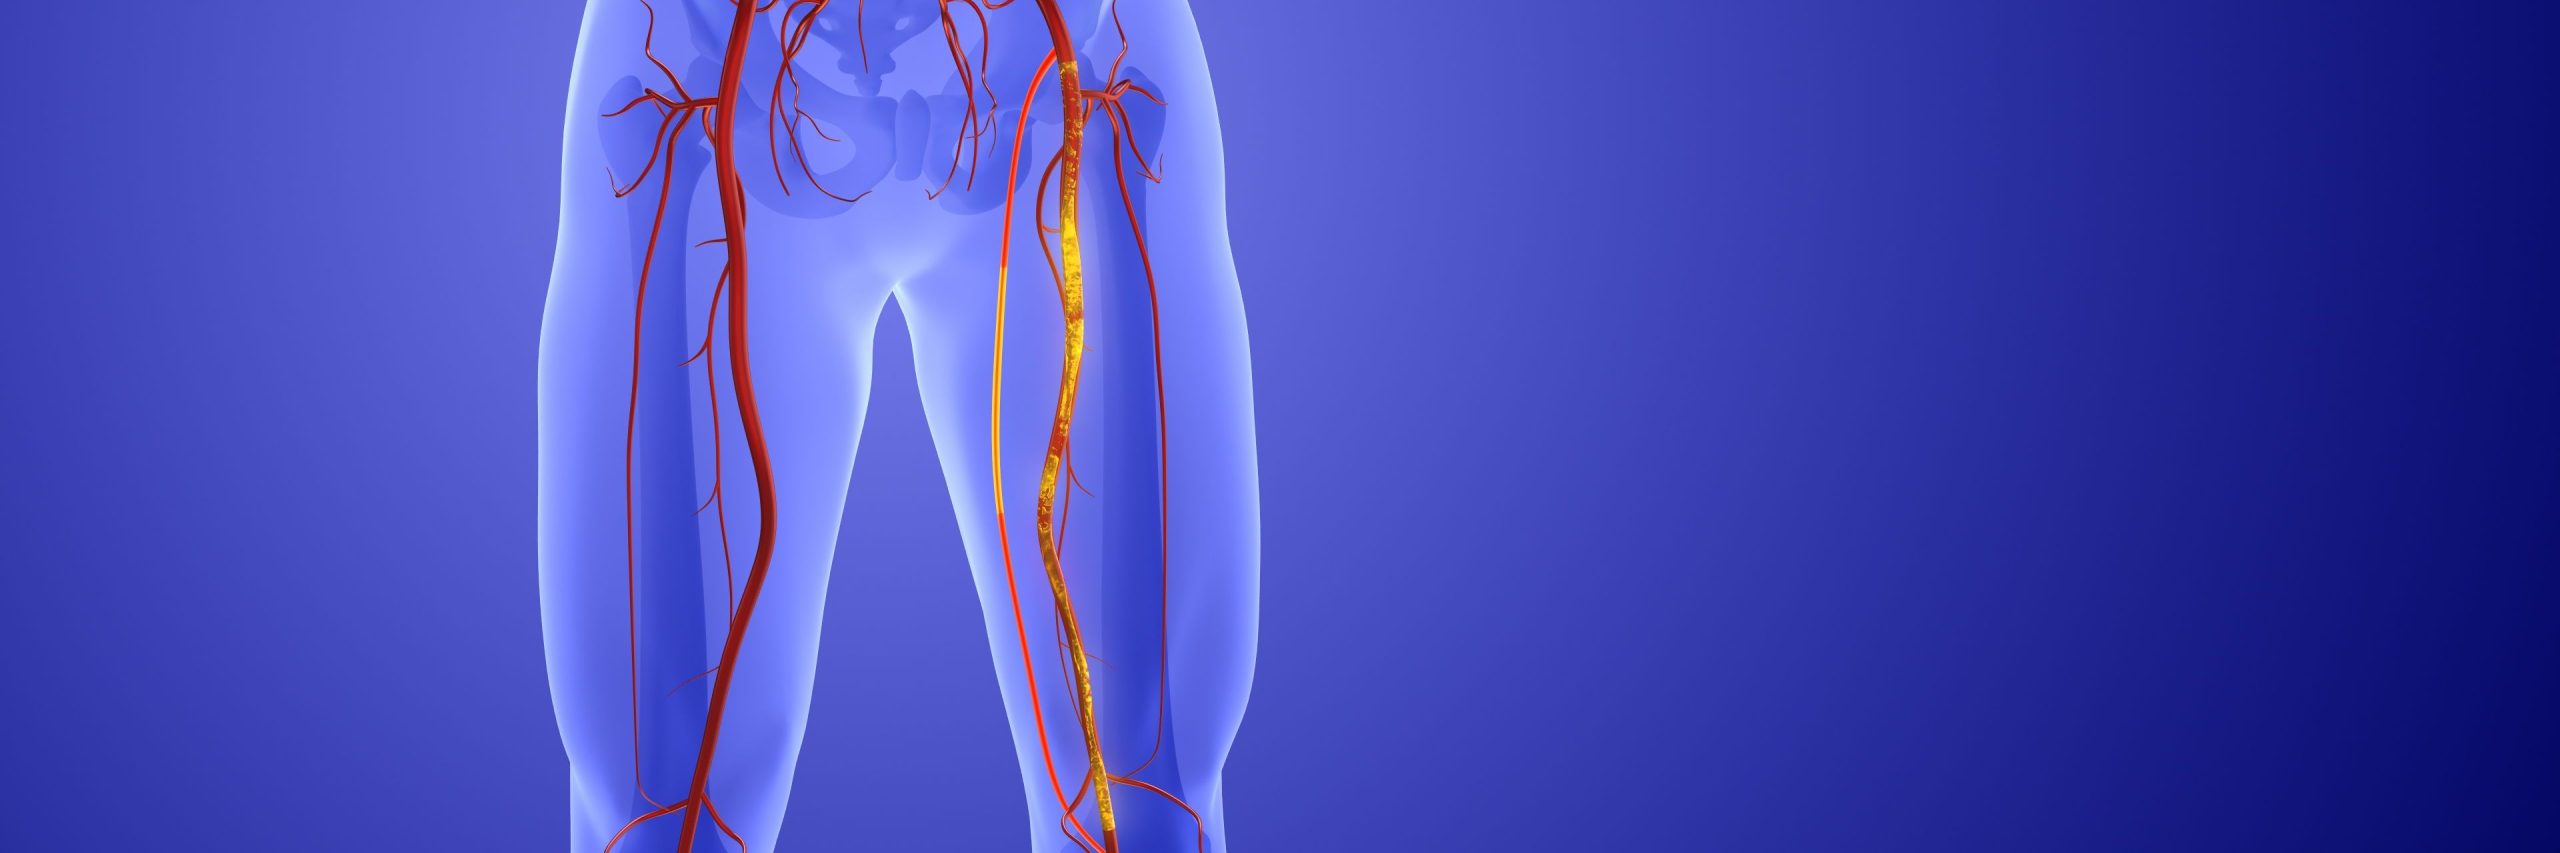 Peripheral Artery Disease: Procedure-Guidance by IVUS Superior to Angiography